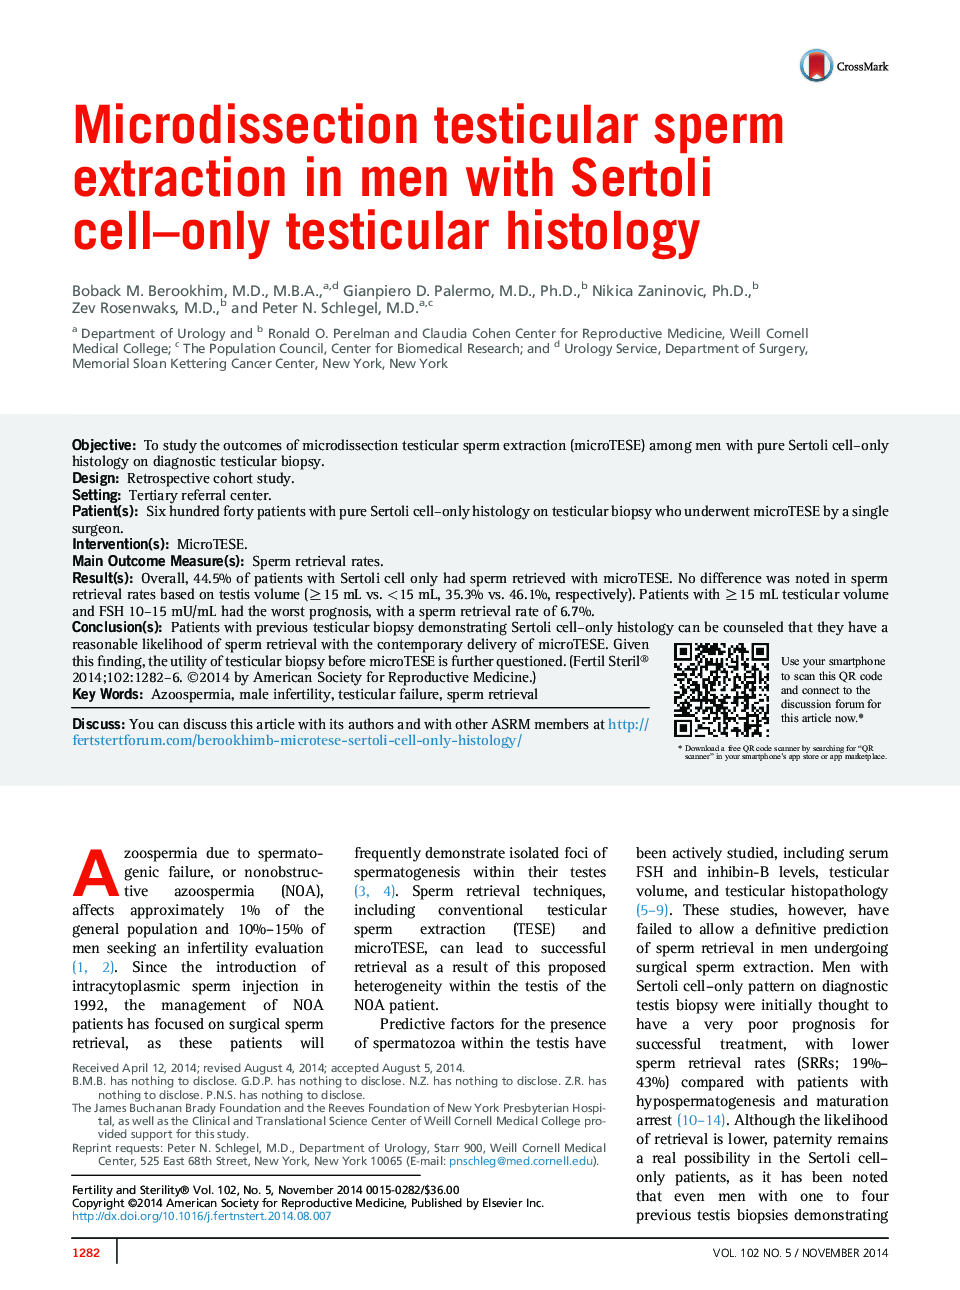 Microdissection testicular sperm extraction in men with Sertoli cell-only testicular histology